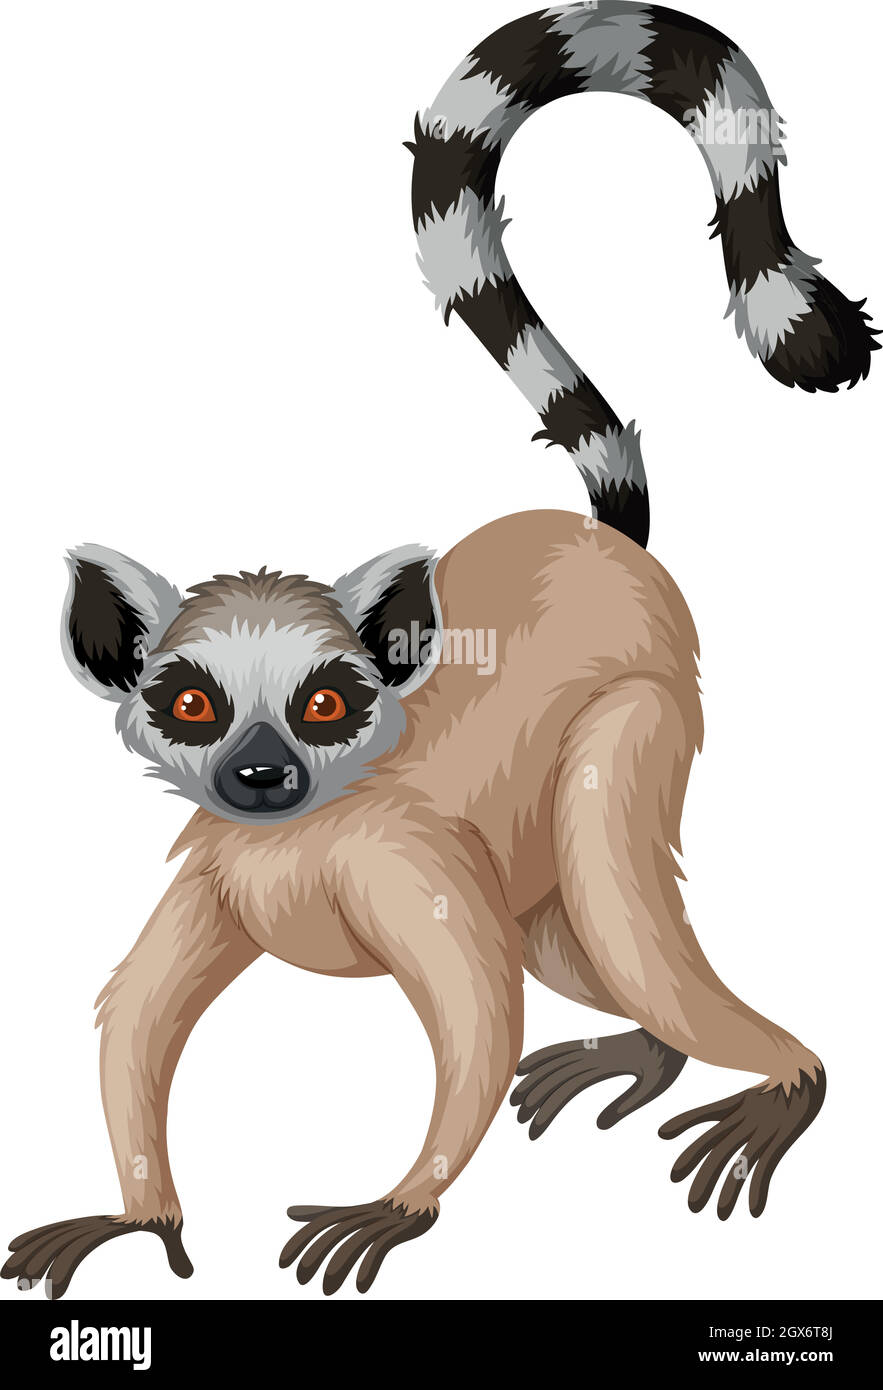 Meerkat with long tail Stock Vector